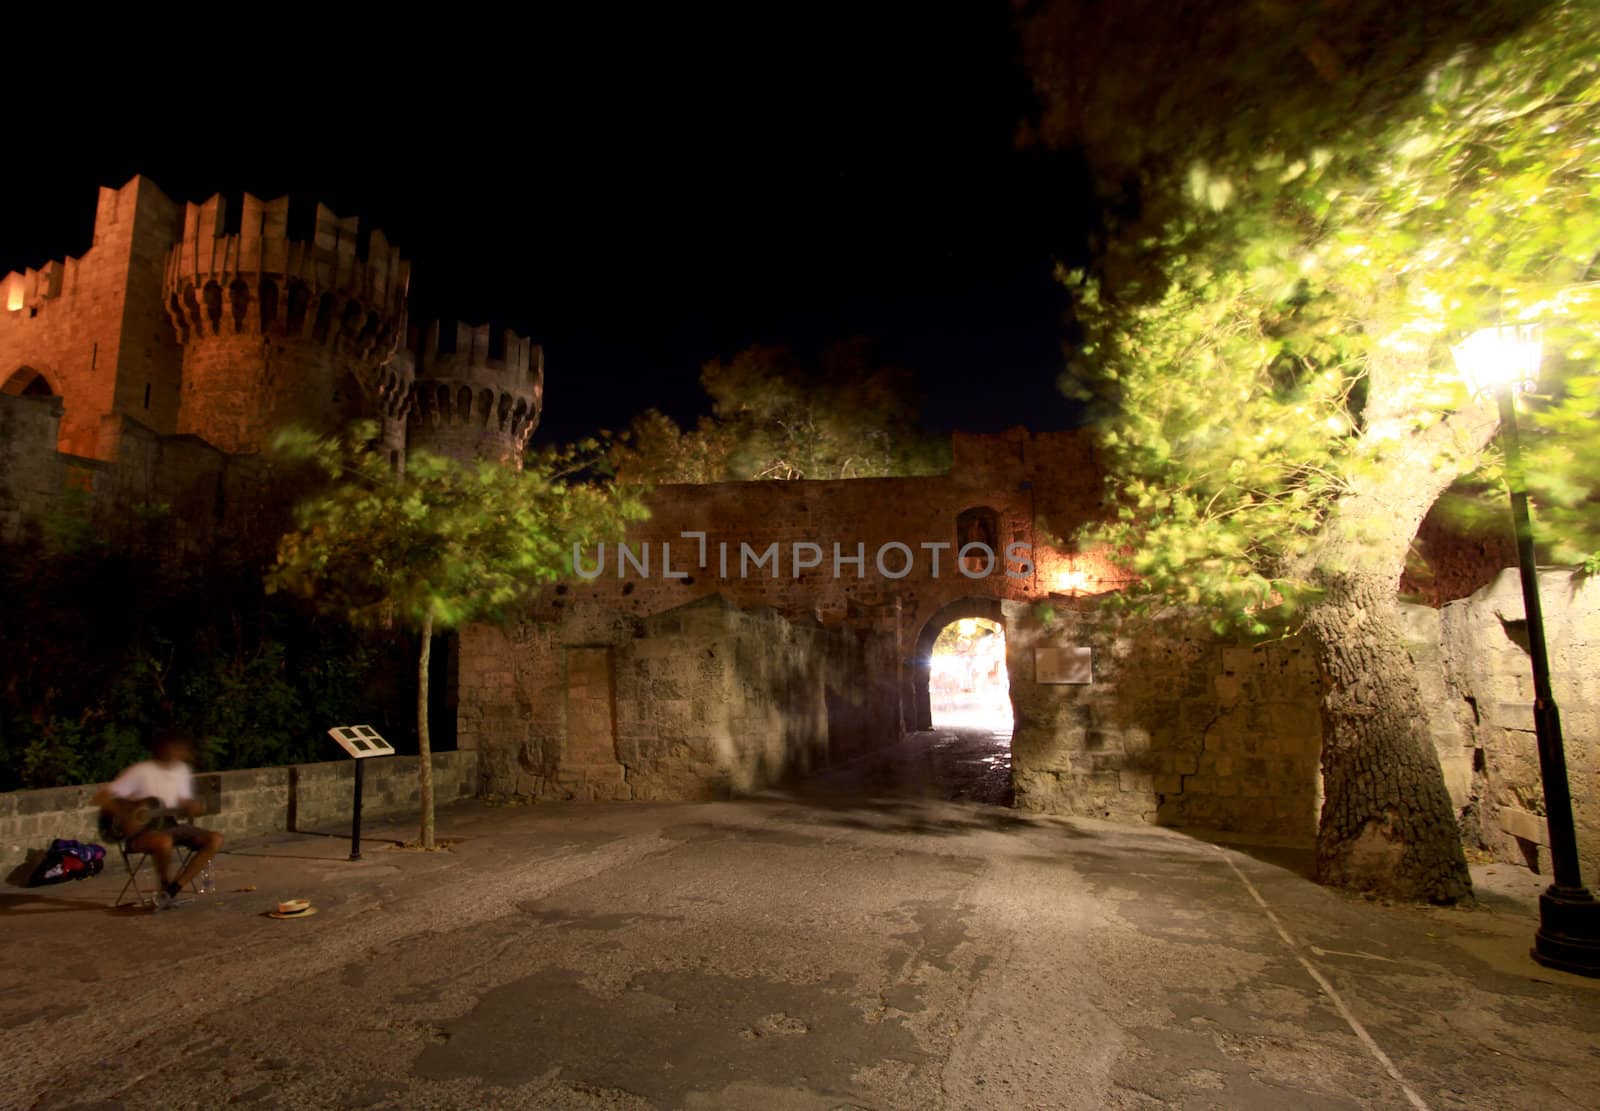 A long exposure motion blurs a local buslter outside the Place of the Grand Masters in Rhodes